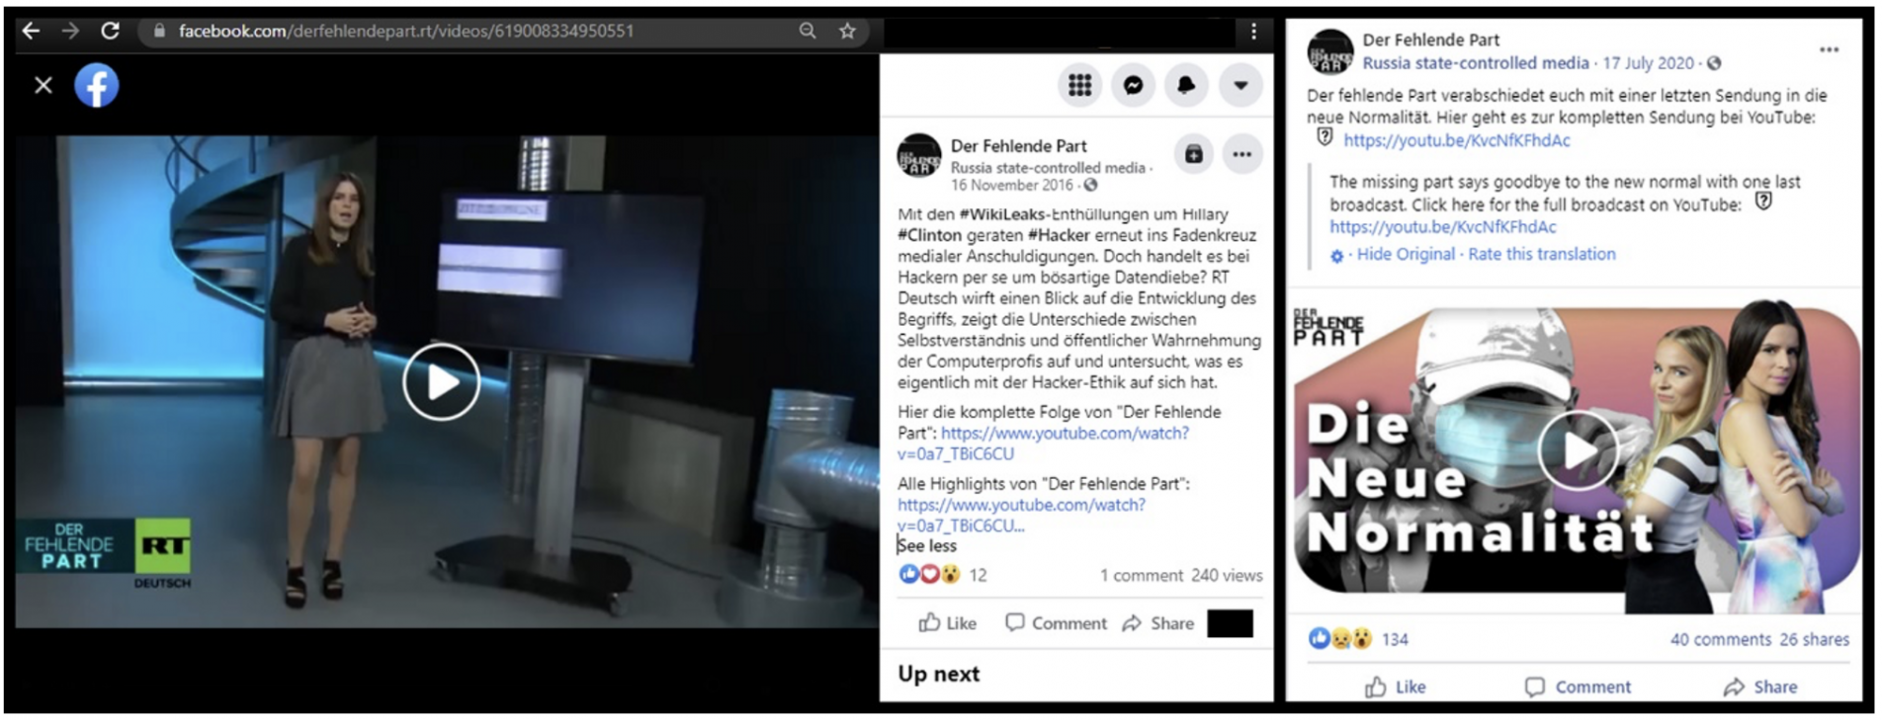 Left: screengrab from November 16, 2016, of the Der Fehlende Part Facebook page containing a link to the now-removed YouTube channel. Right: July 2020 post announcing that the show will cease airing.